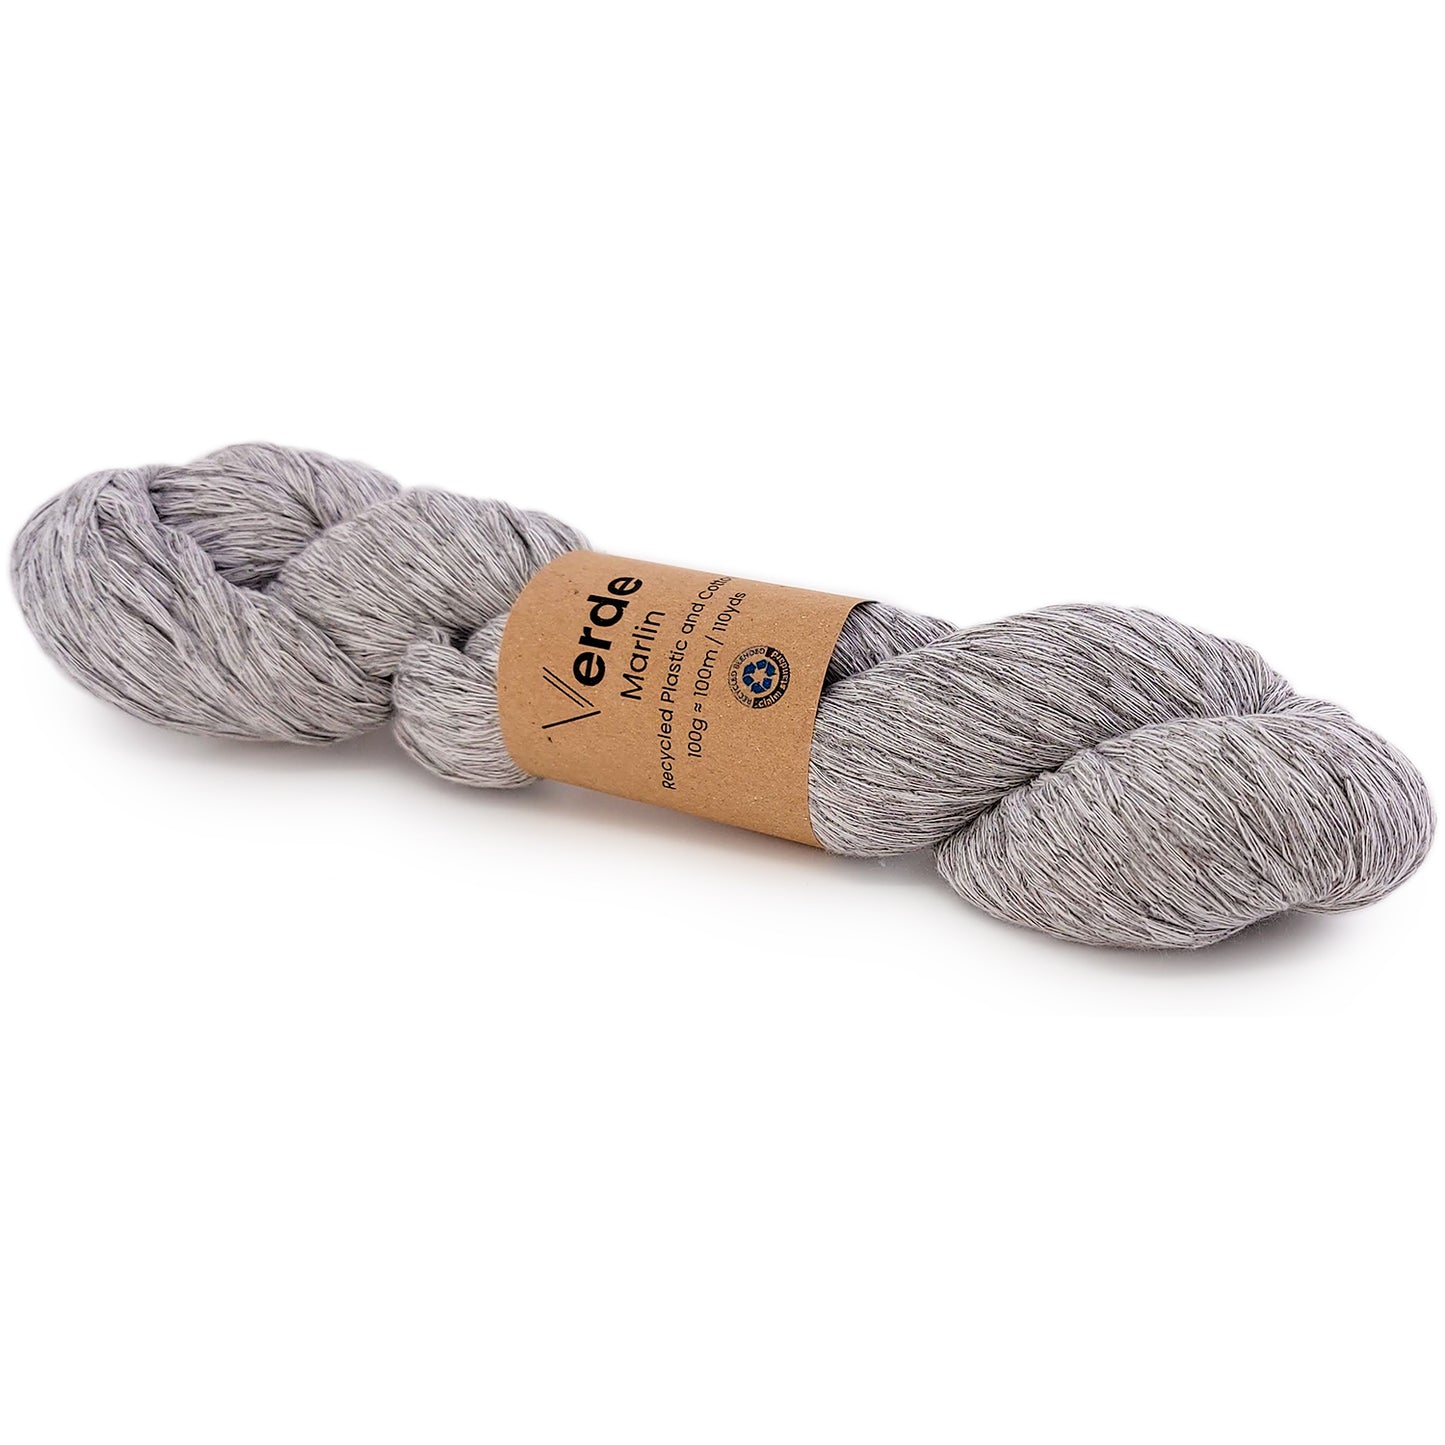 Marlin | Recycled Plastic & Cotton 100g Skein